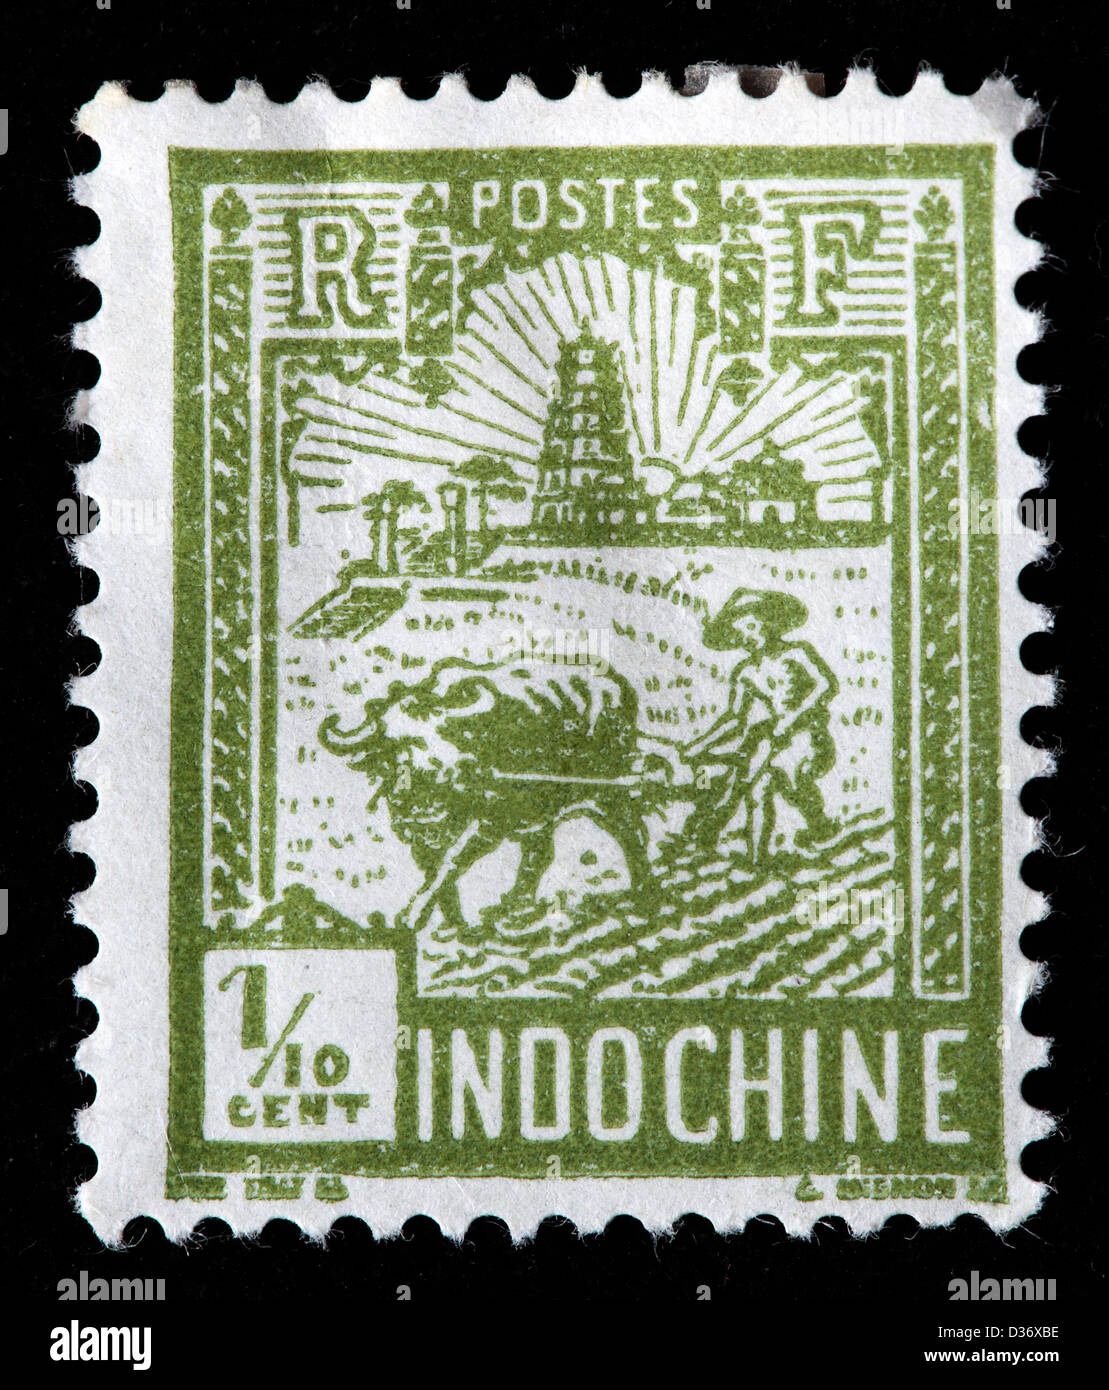 Plowing, Tower of Confucius, Indochina, postage stamp, 1927 Stock Photo